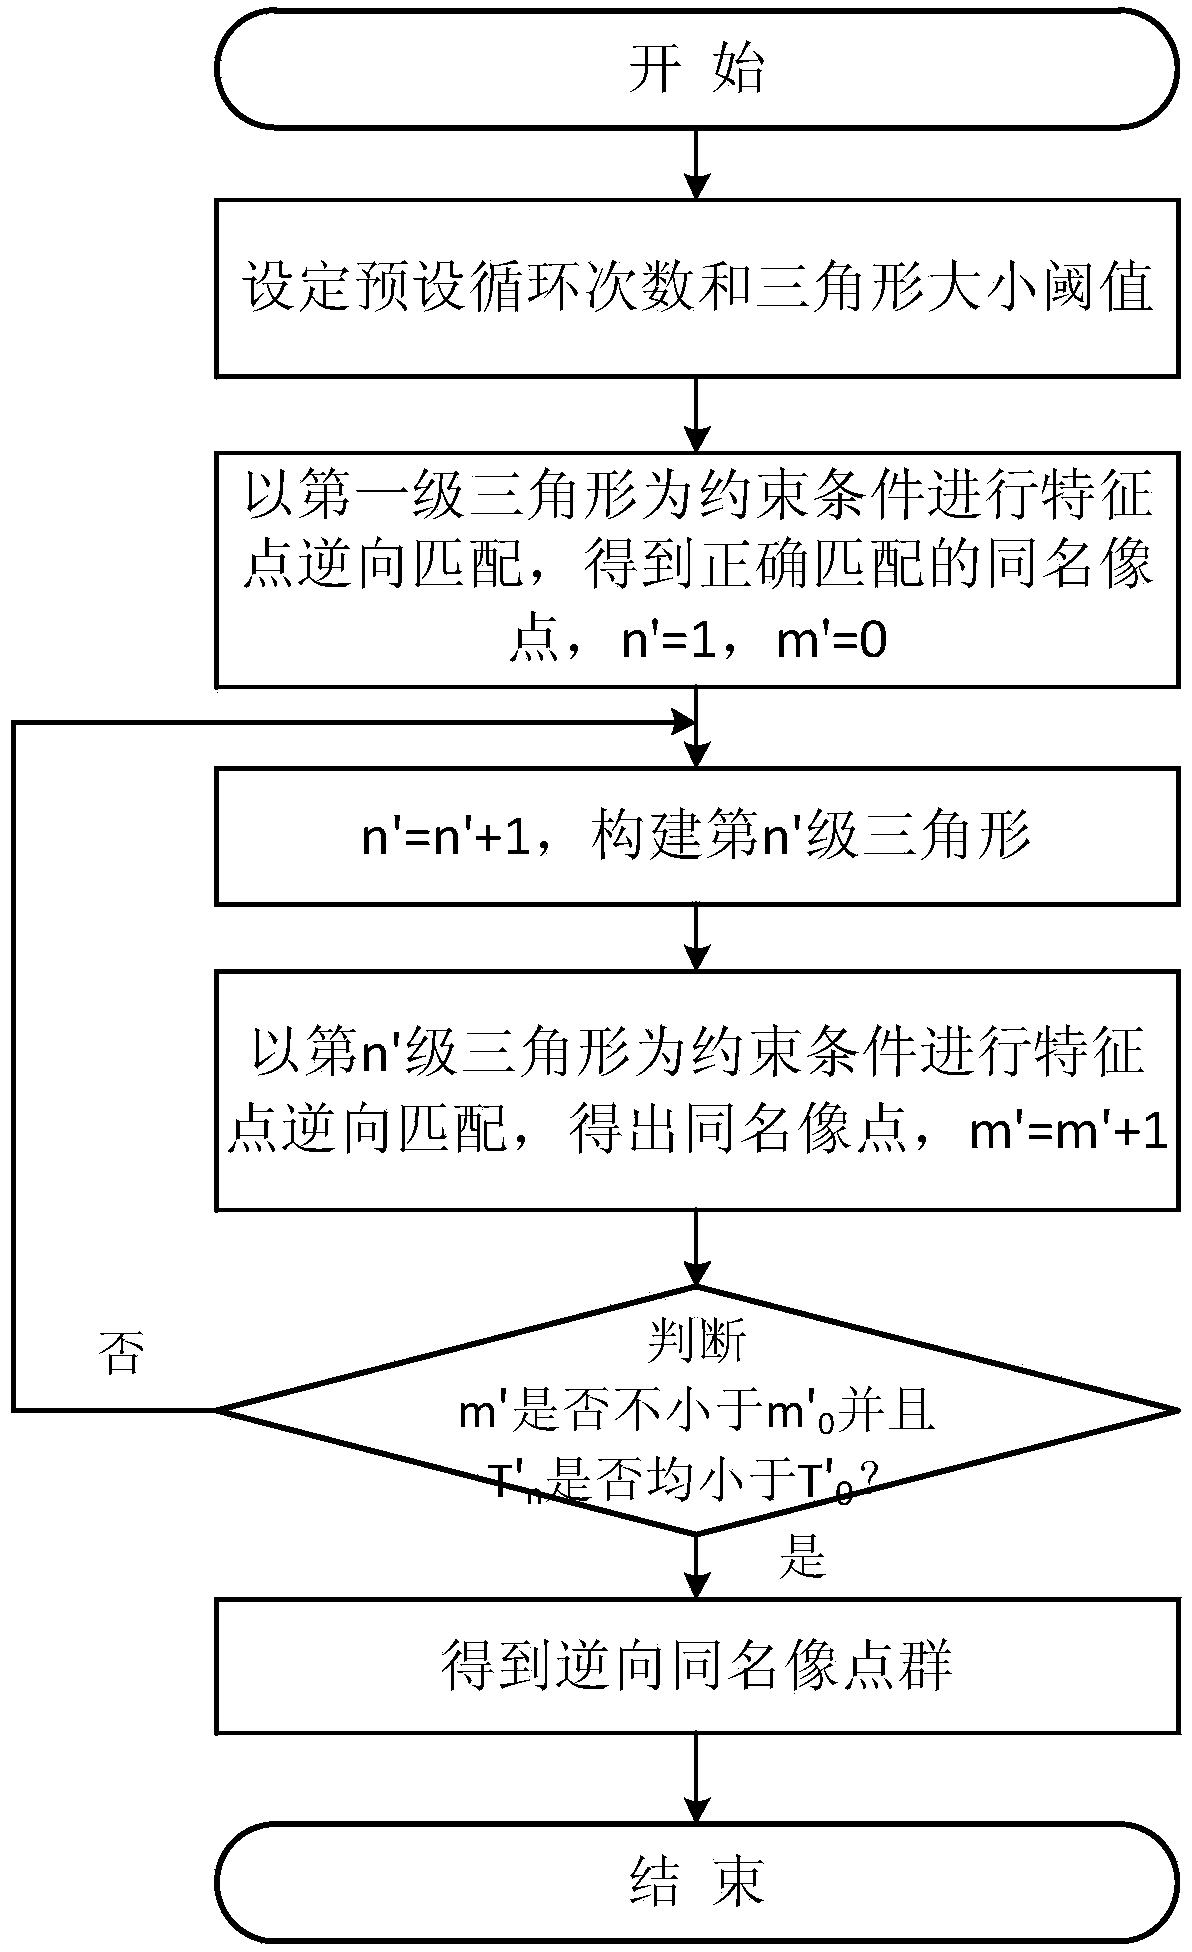 Feature point matching method for close-range shot stereoscopic image